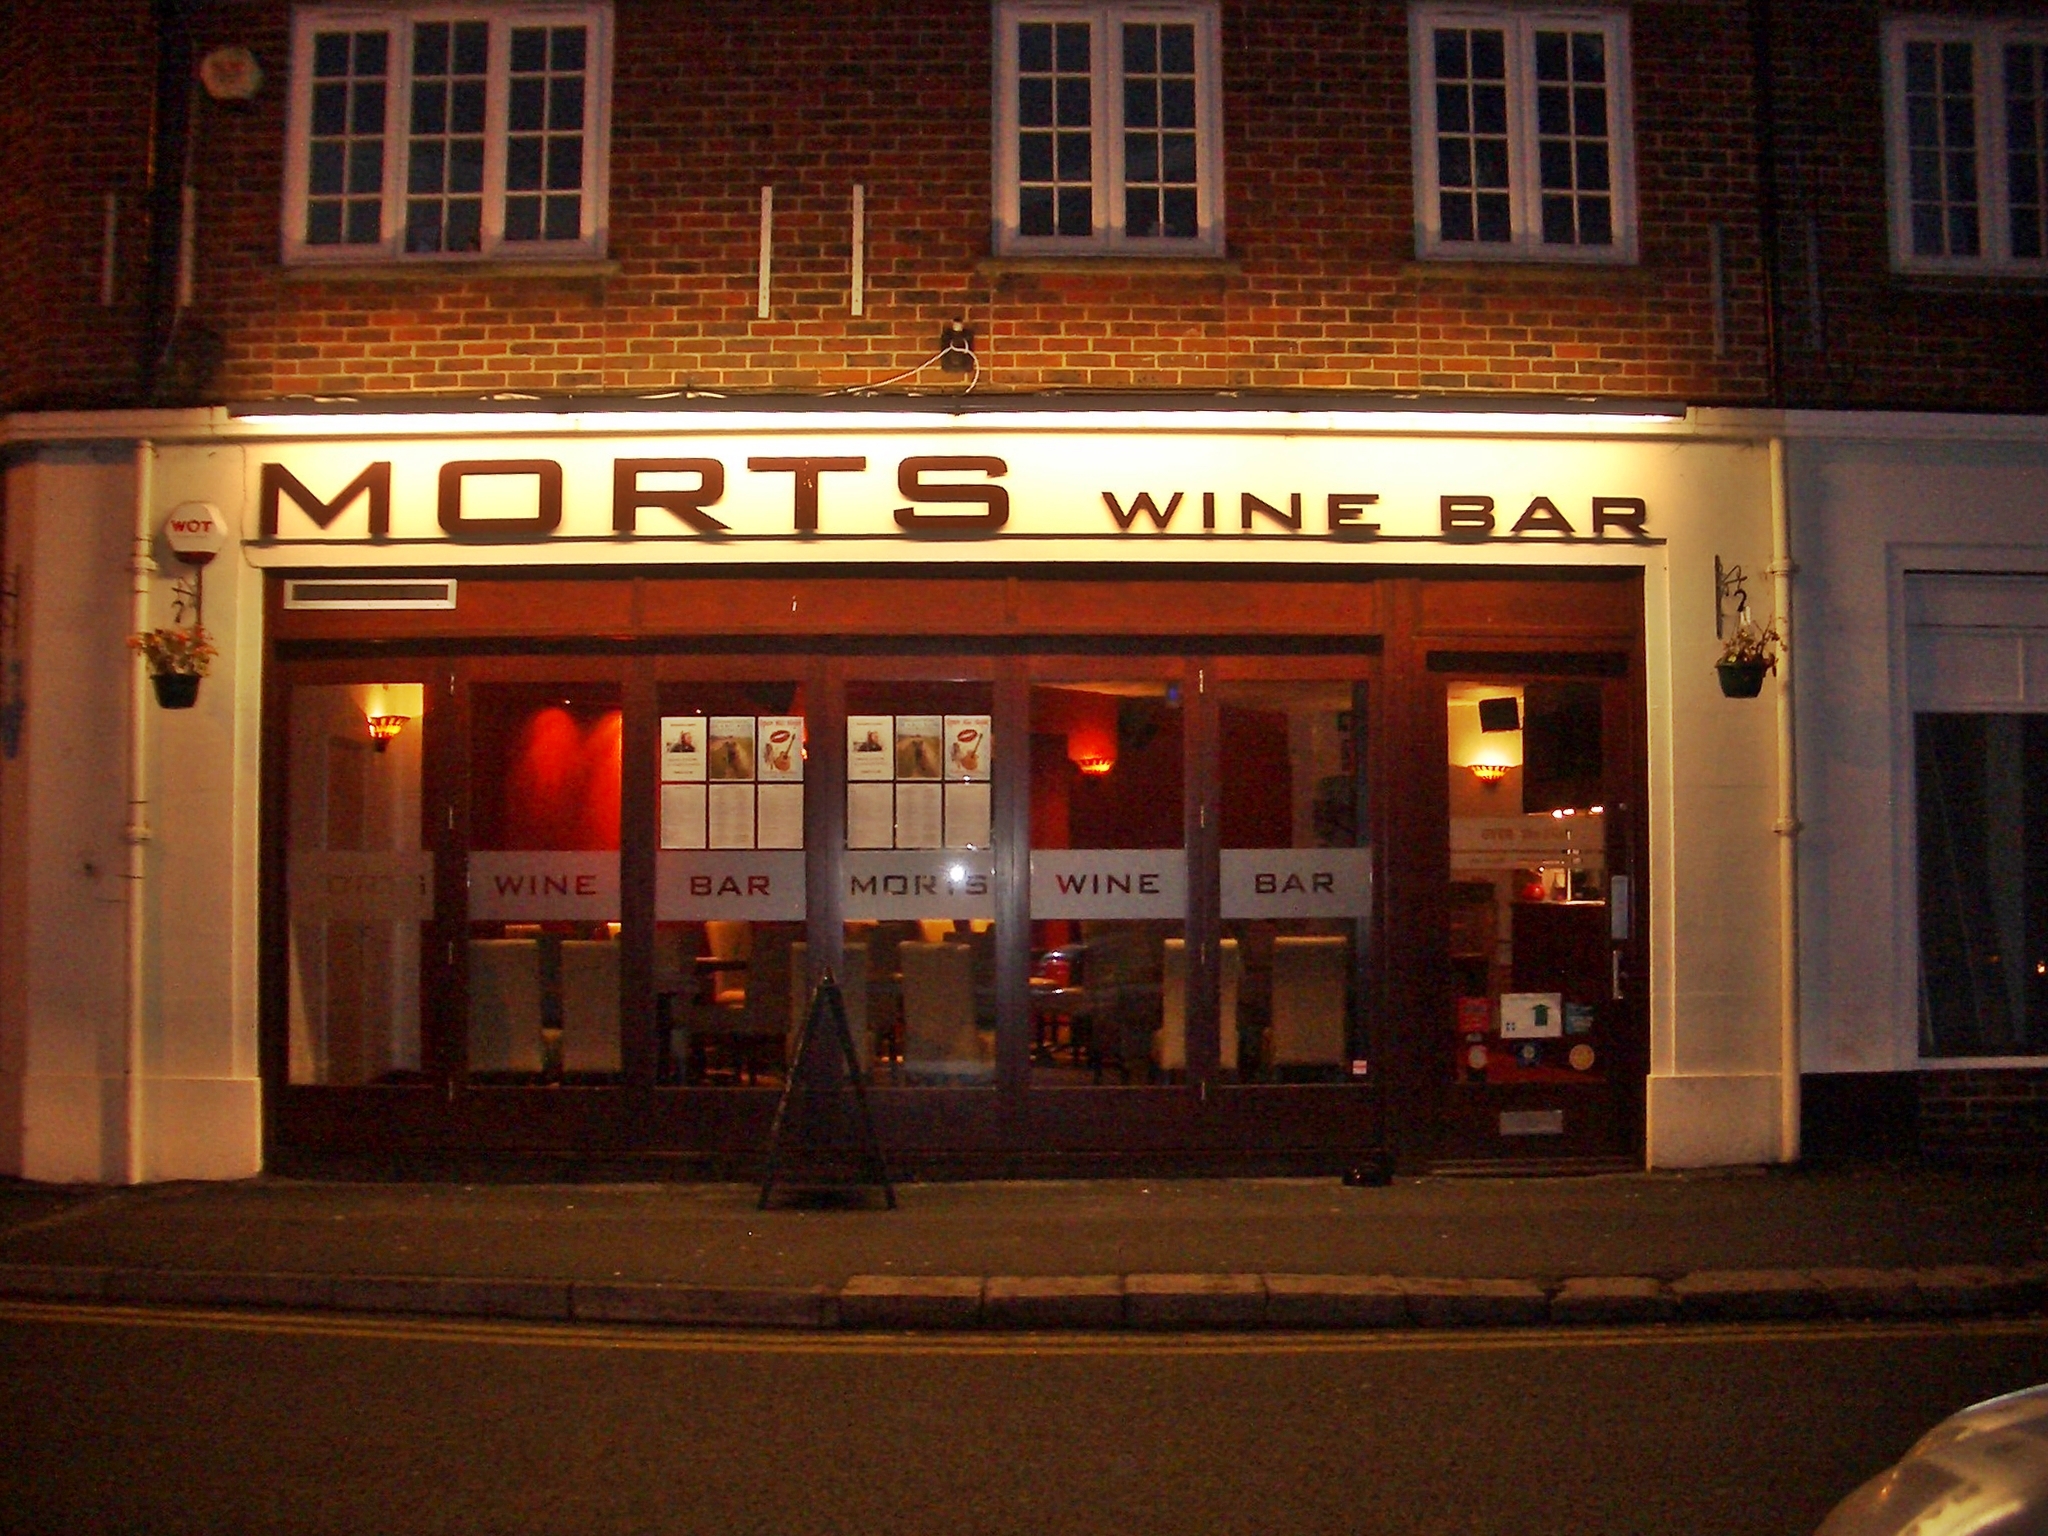 Picture of Morts Wine Bar - Exterior - Night